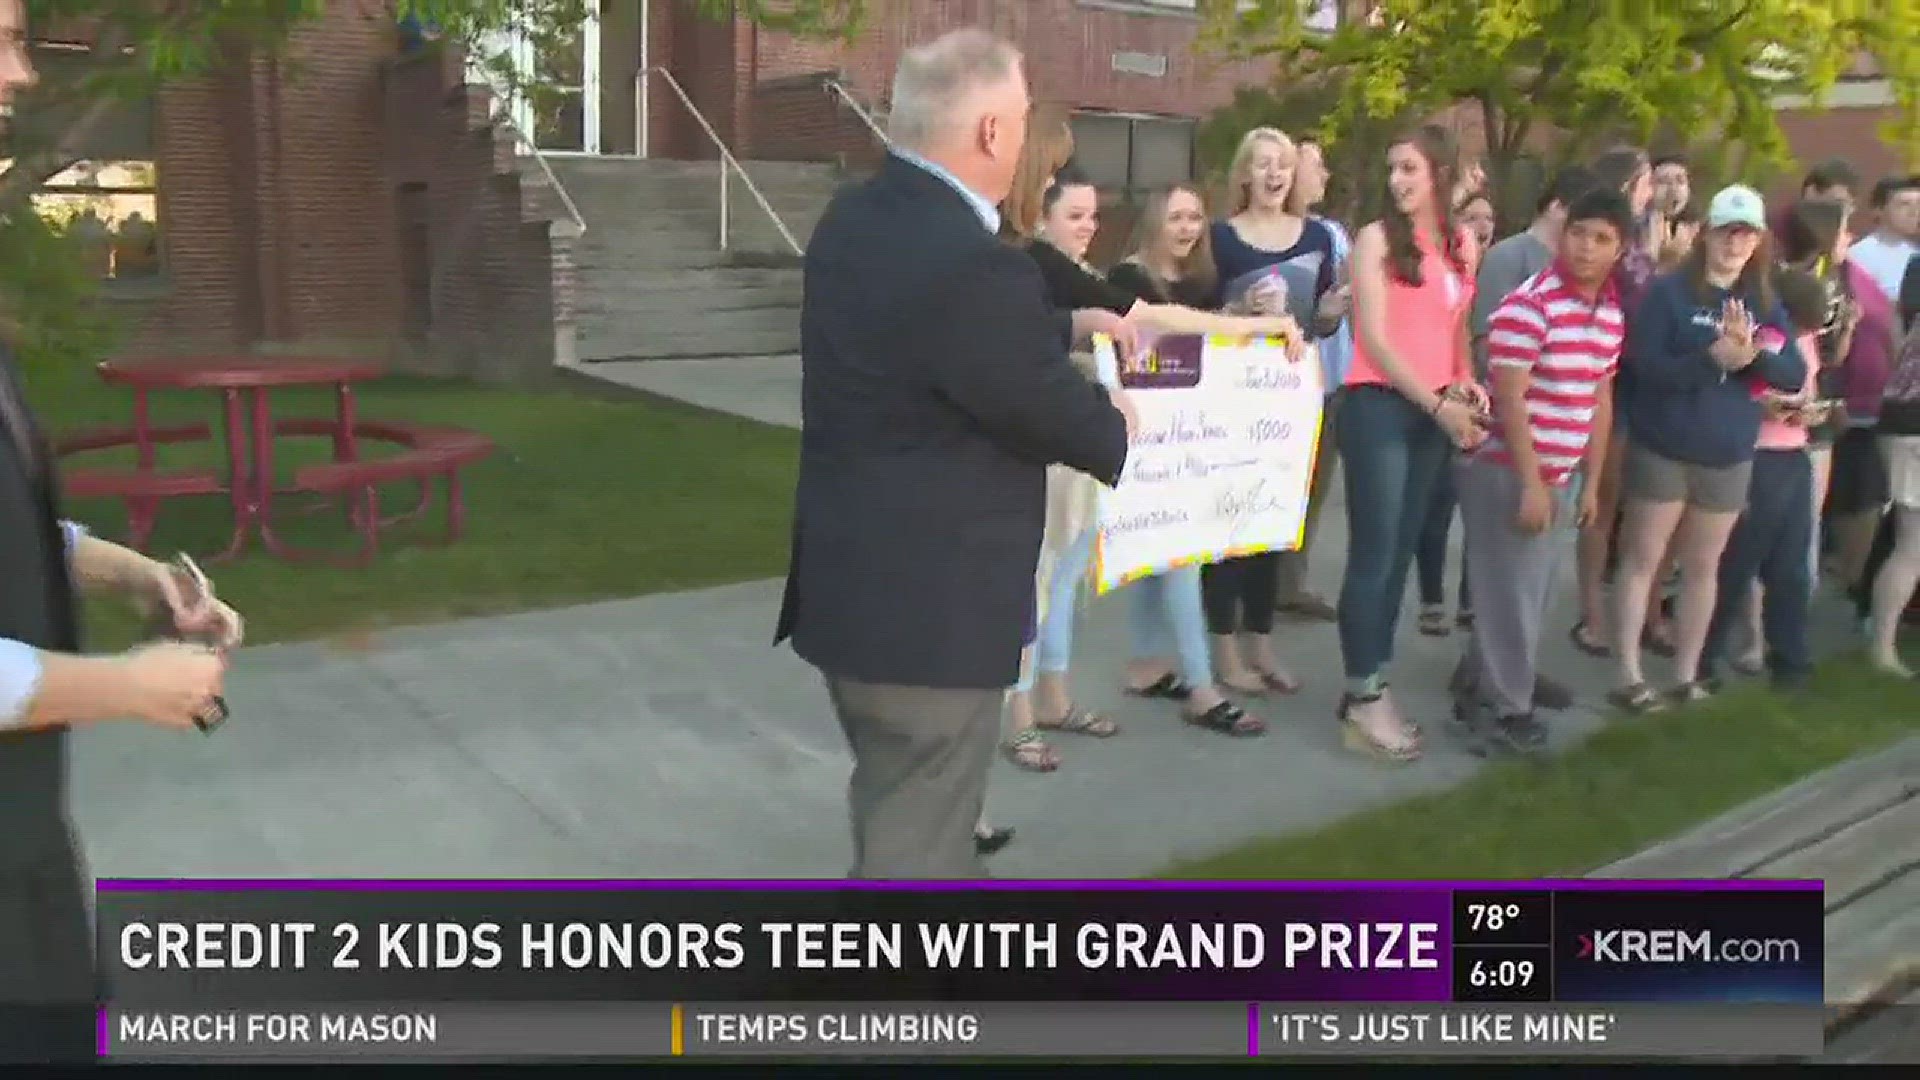 Credit 2 Kids honor teens with grand prize